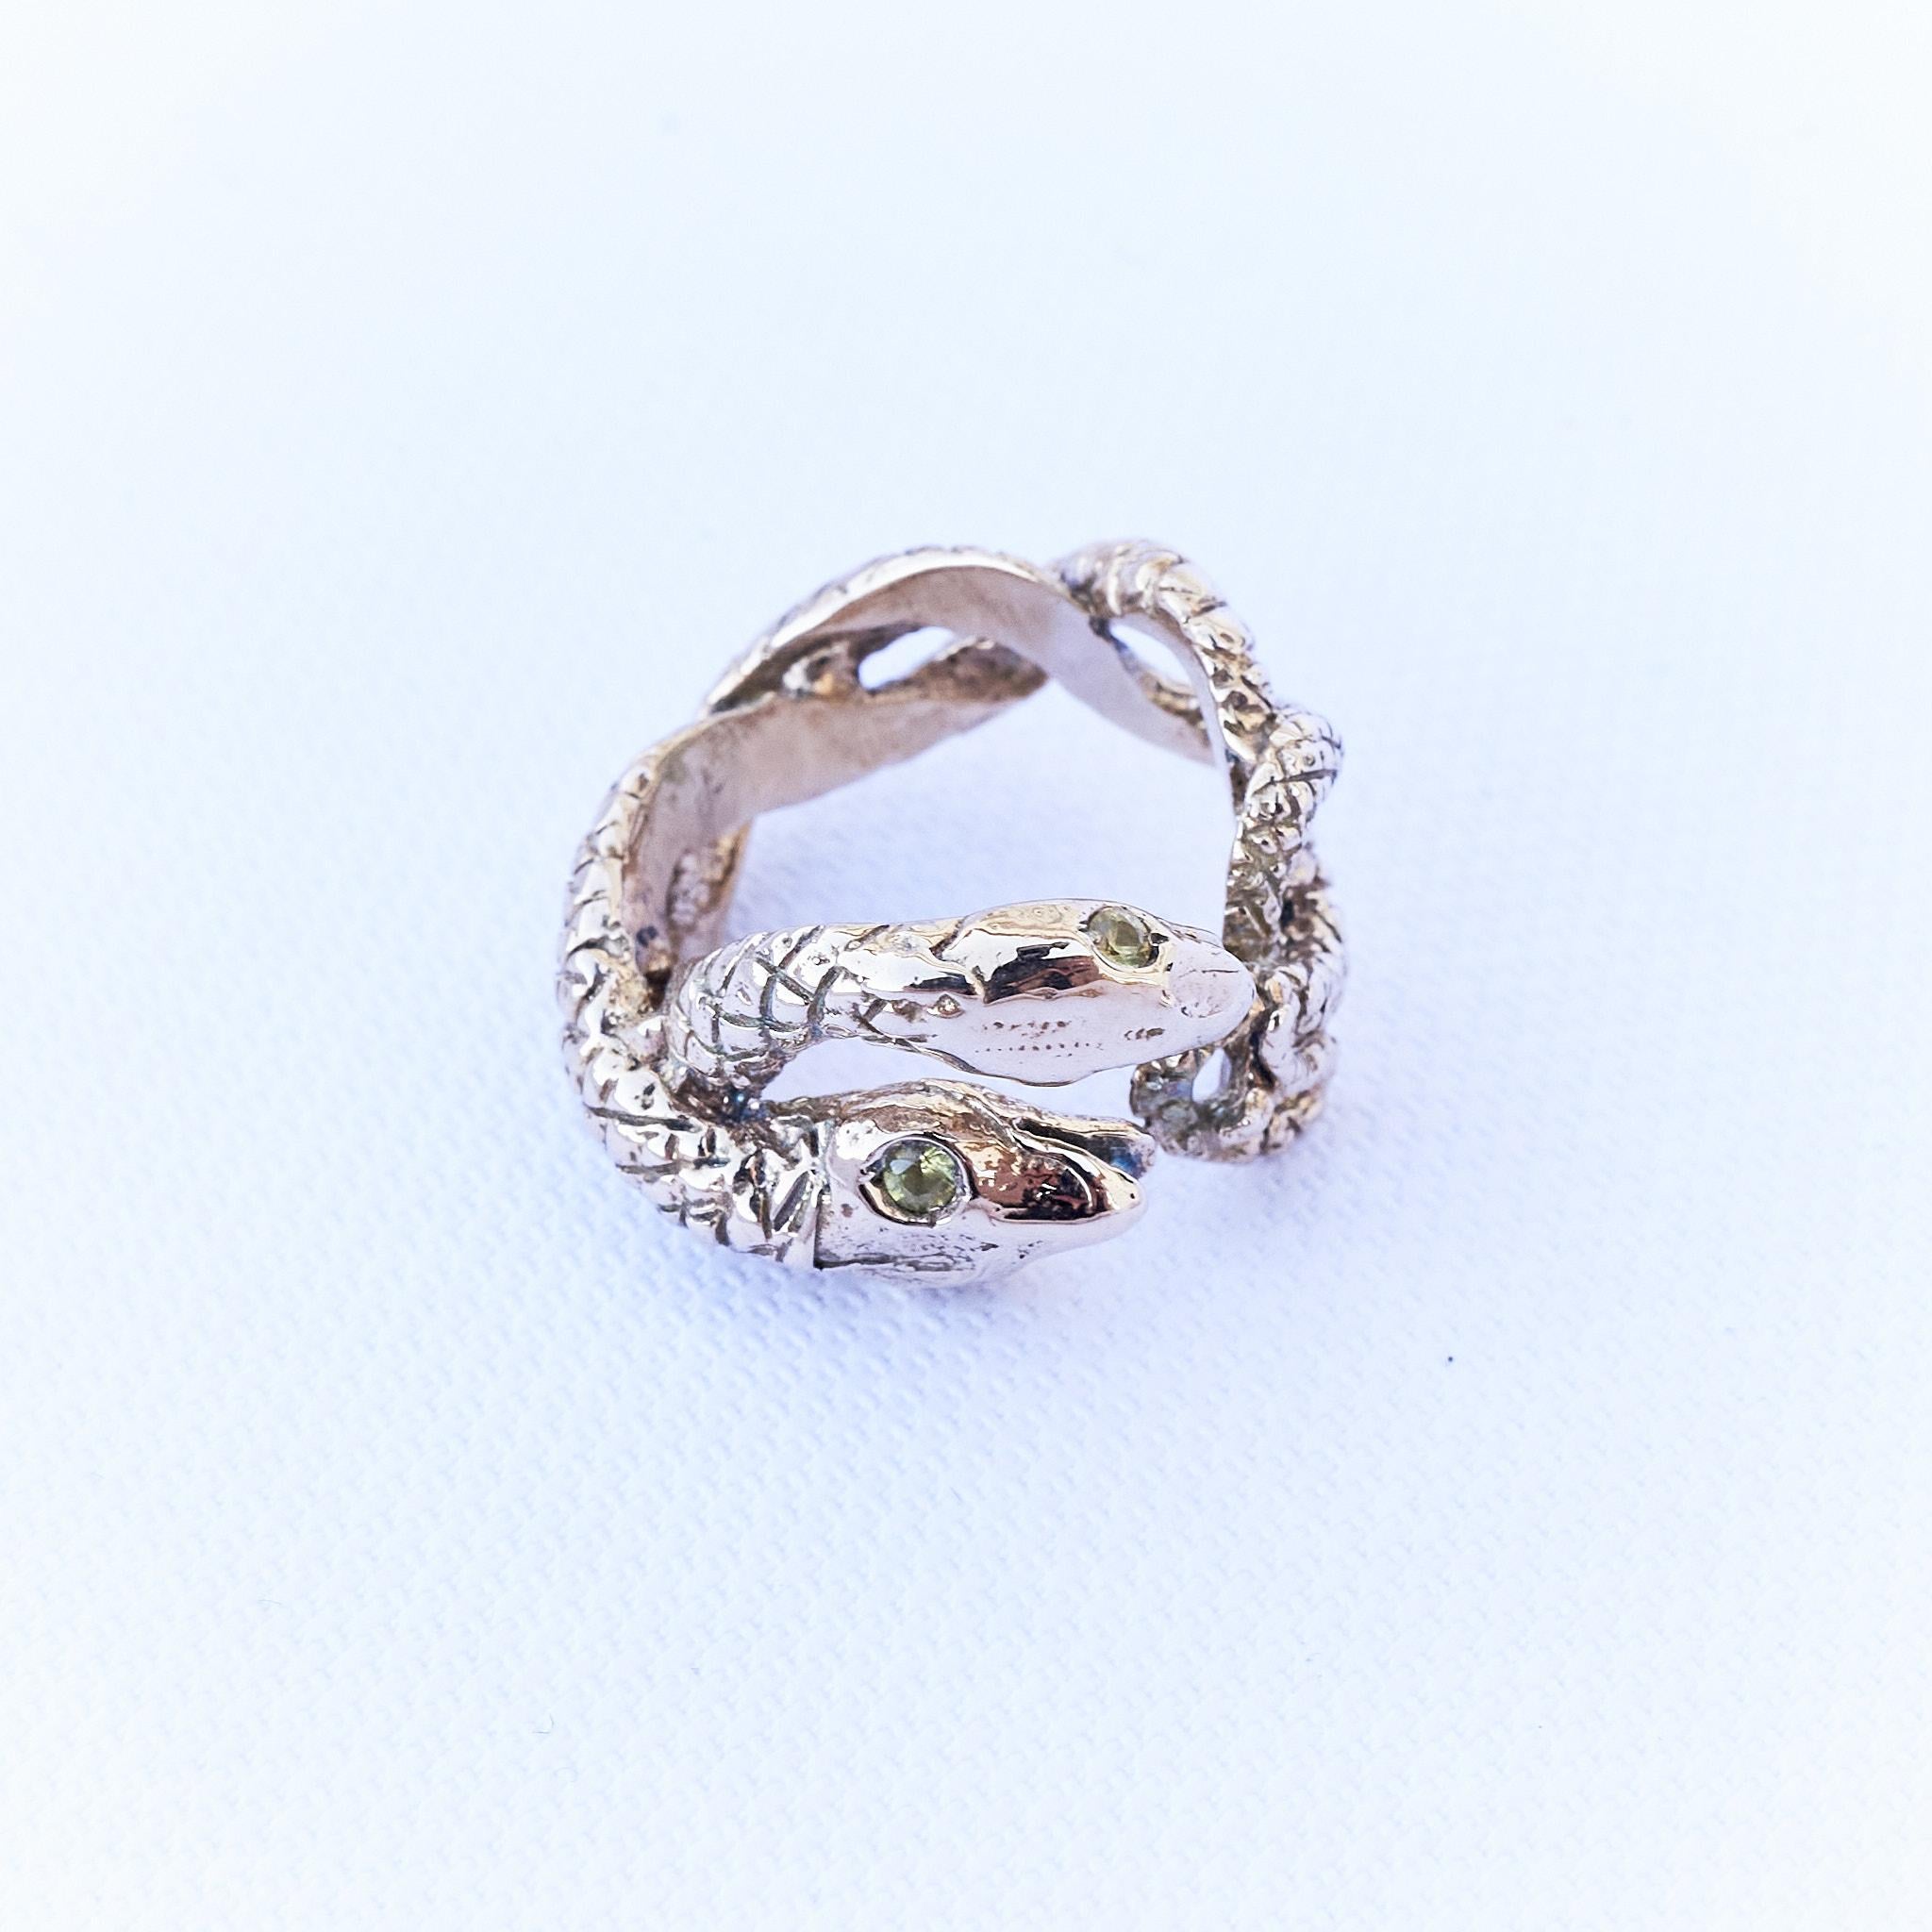 Brilliant Cut Yellow Sapphire Snake Ring Cocktail Ring Bronze J Dauphin For Sale